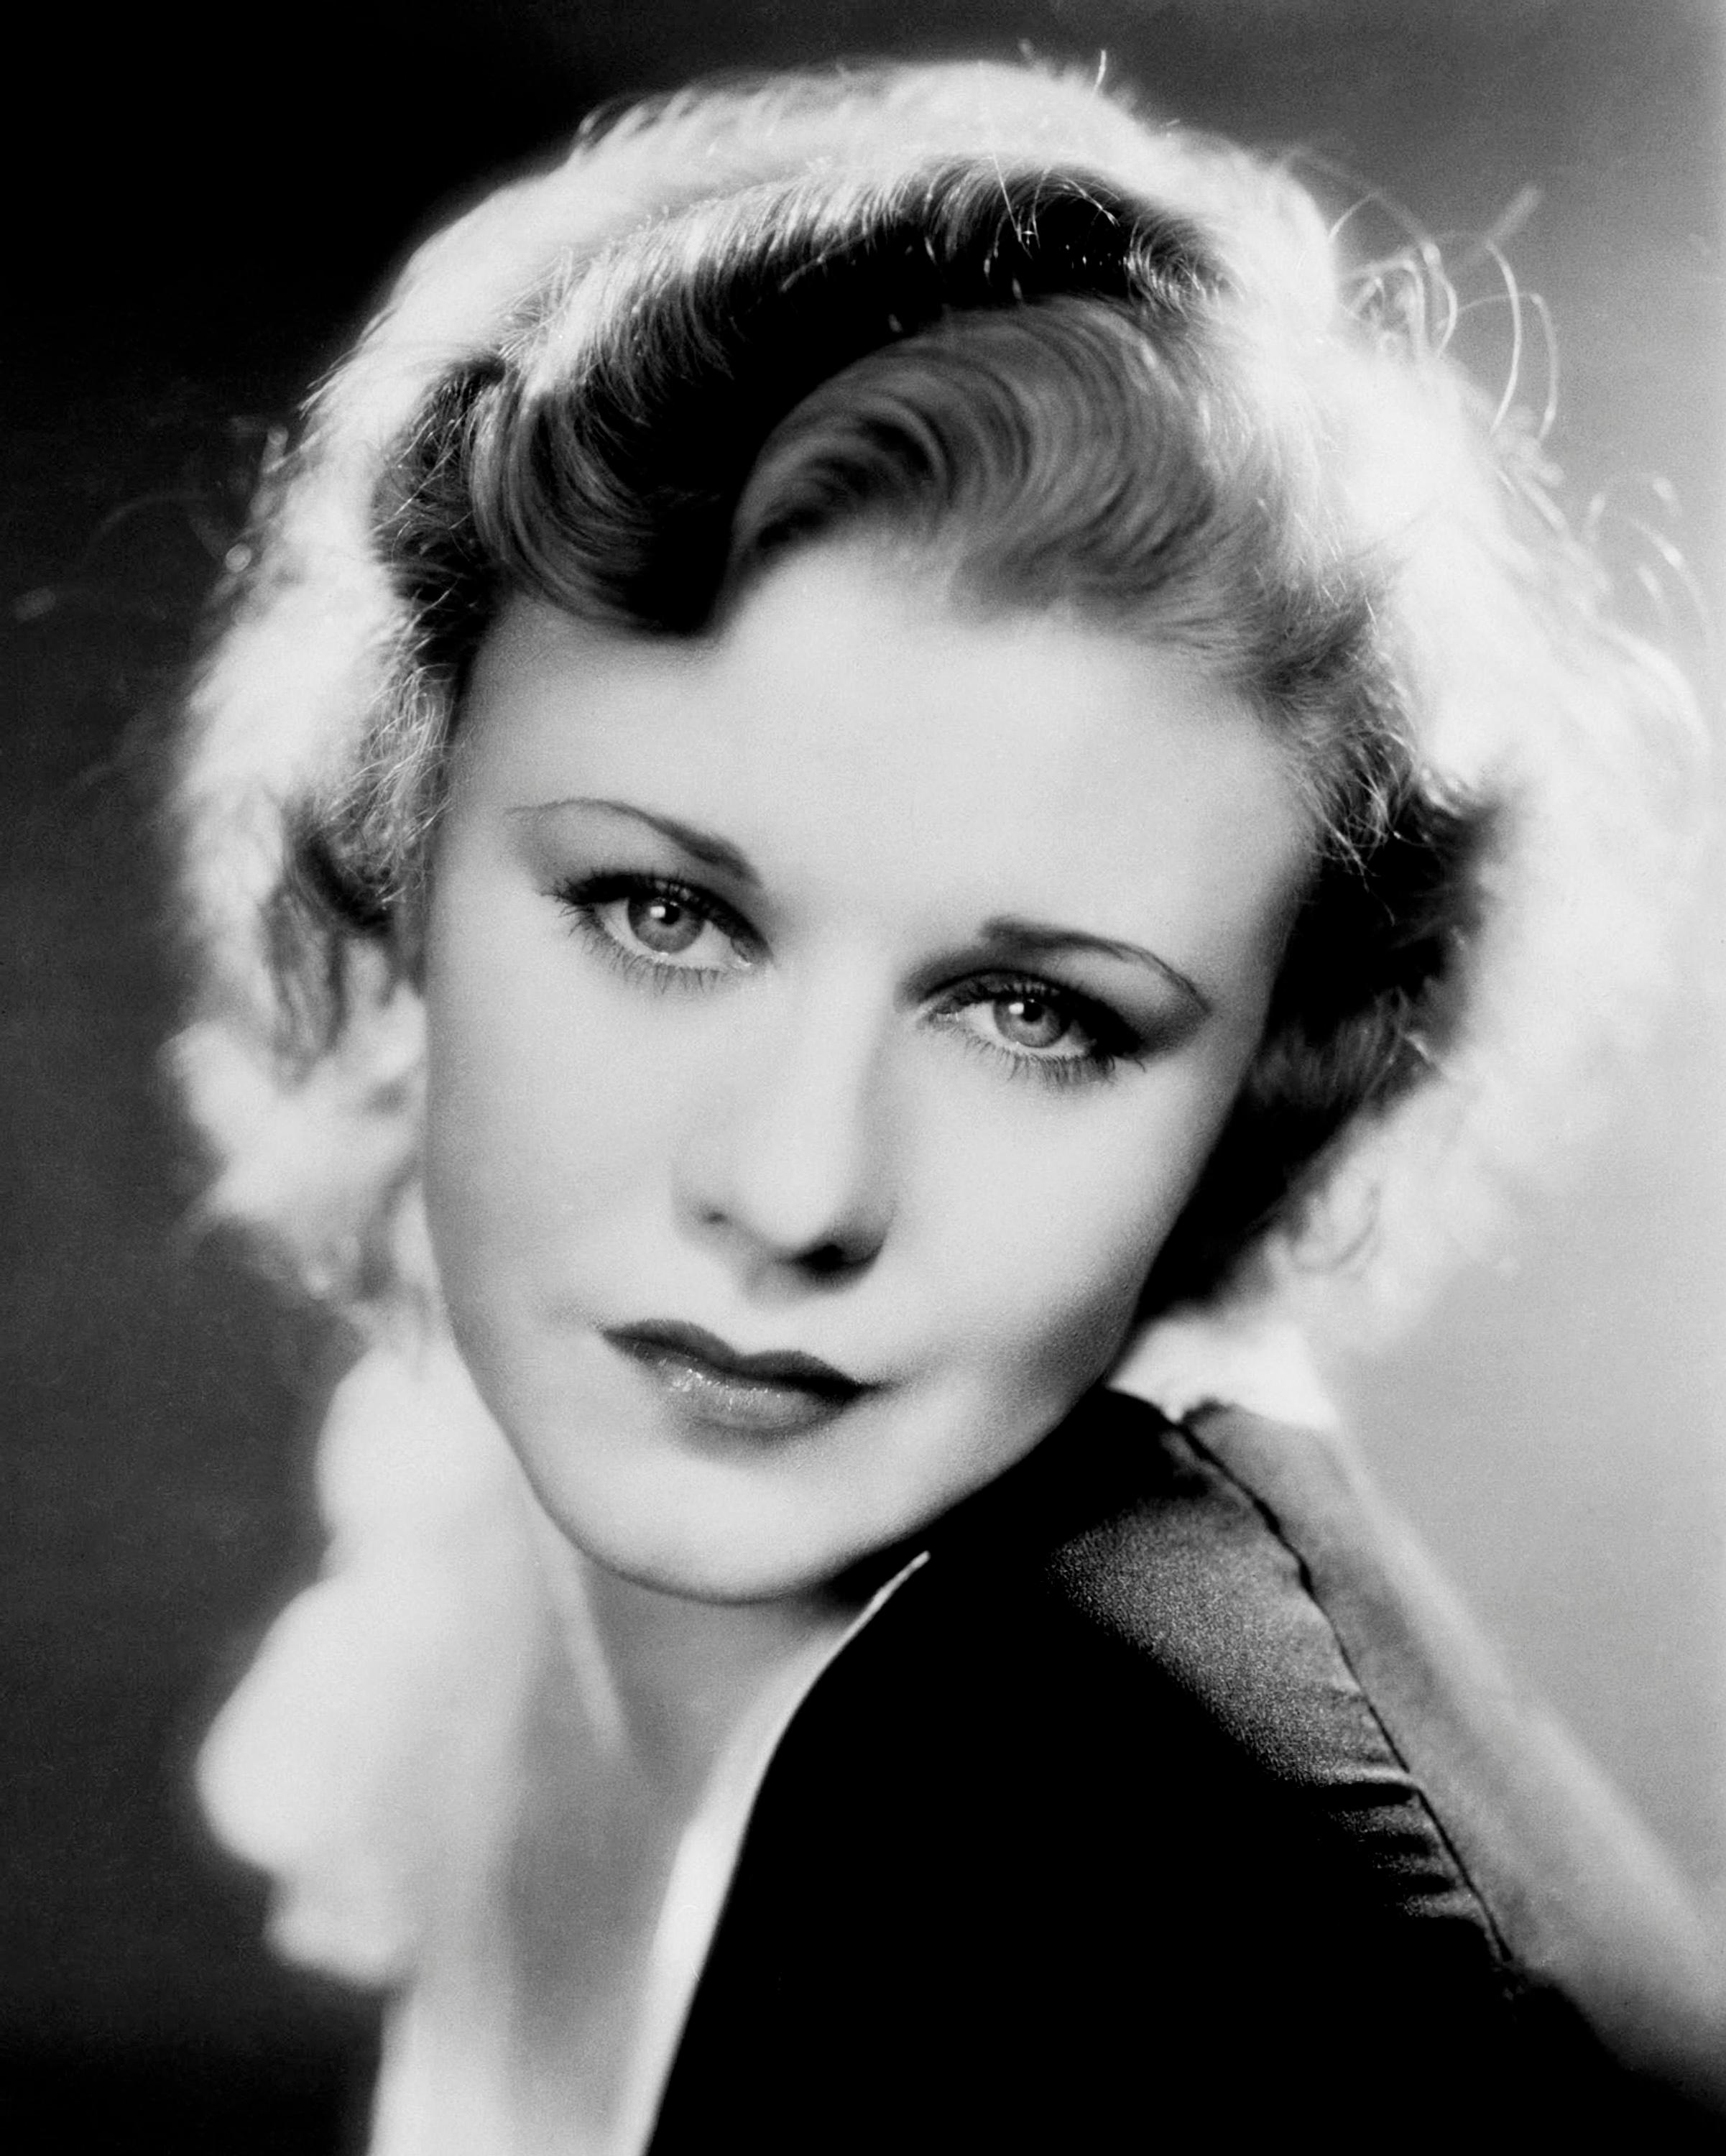 Unknown Black and White Photograph – Ginger Rogers: Those Eyes Globe Photos Fine Art Print